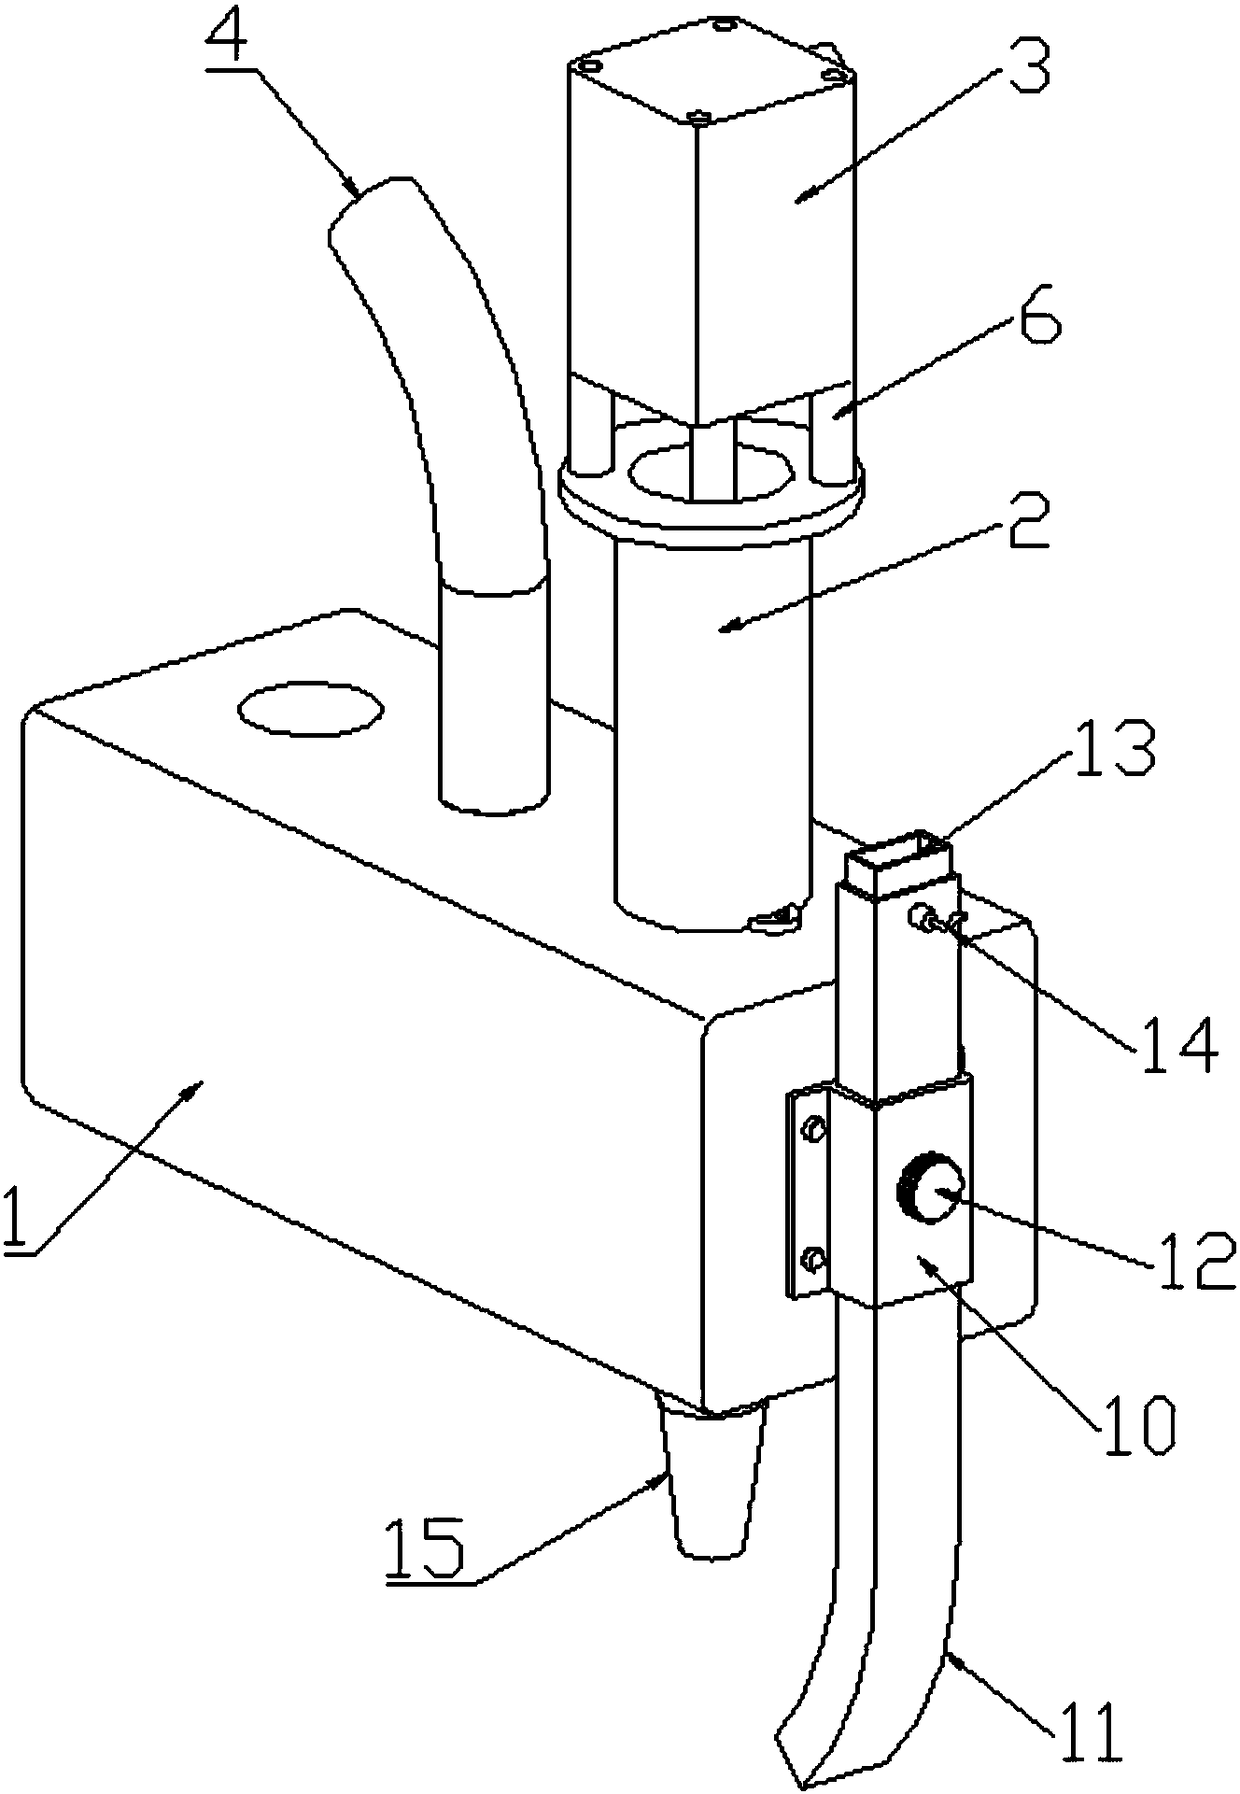 Intermittent glue filling device for automatic glue filling of wire harness terminal